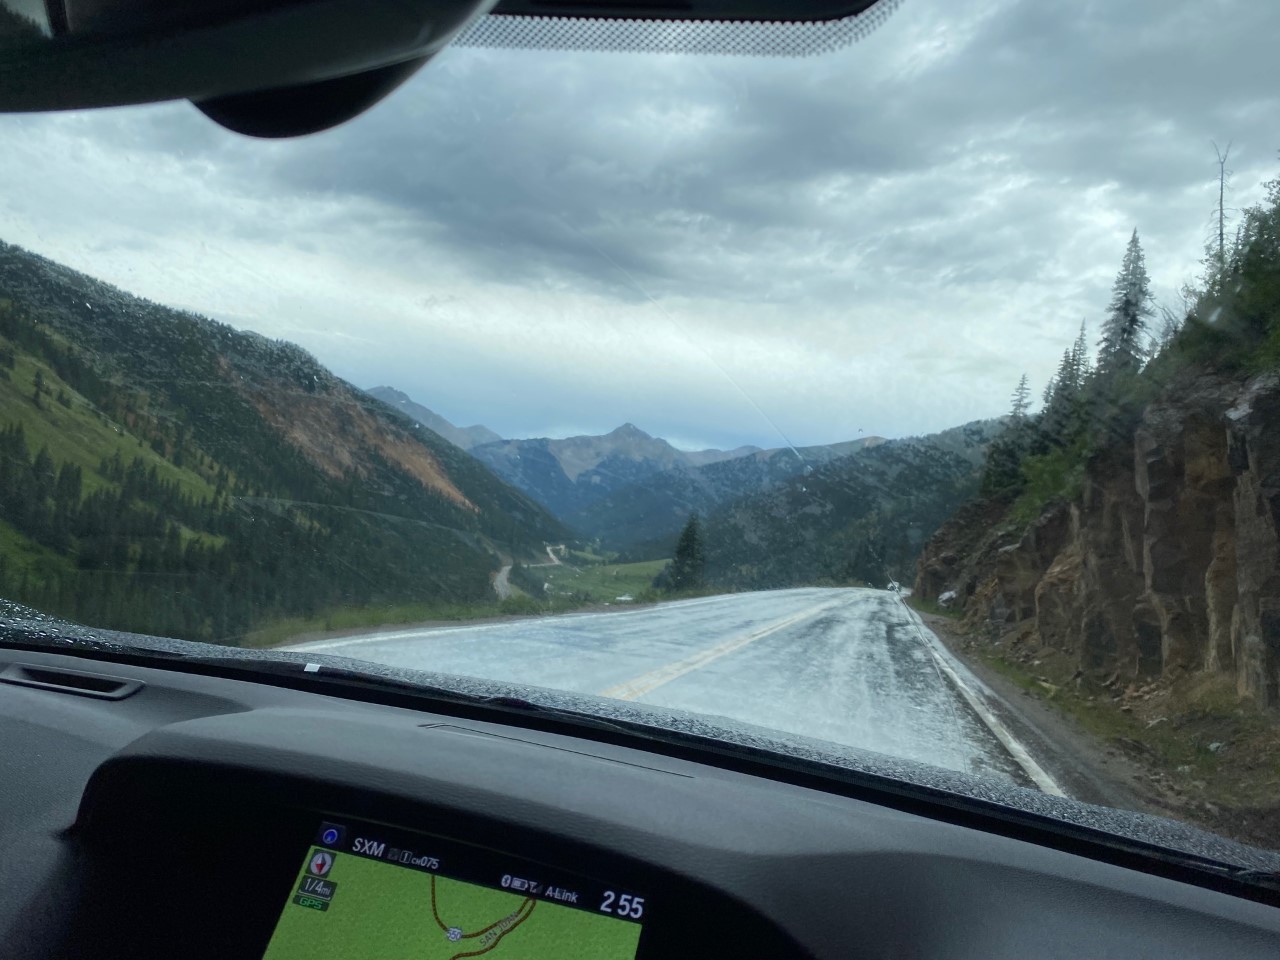 A rainy drive for several miles from Ouray to Silverton.